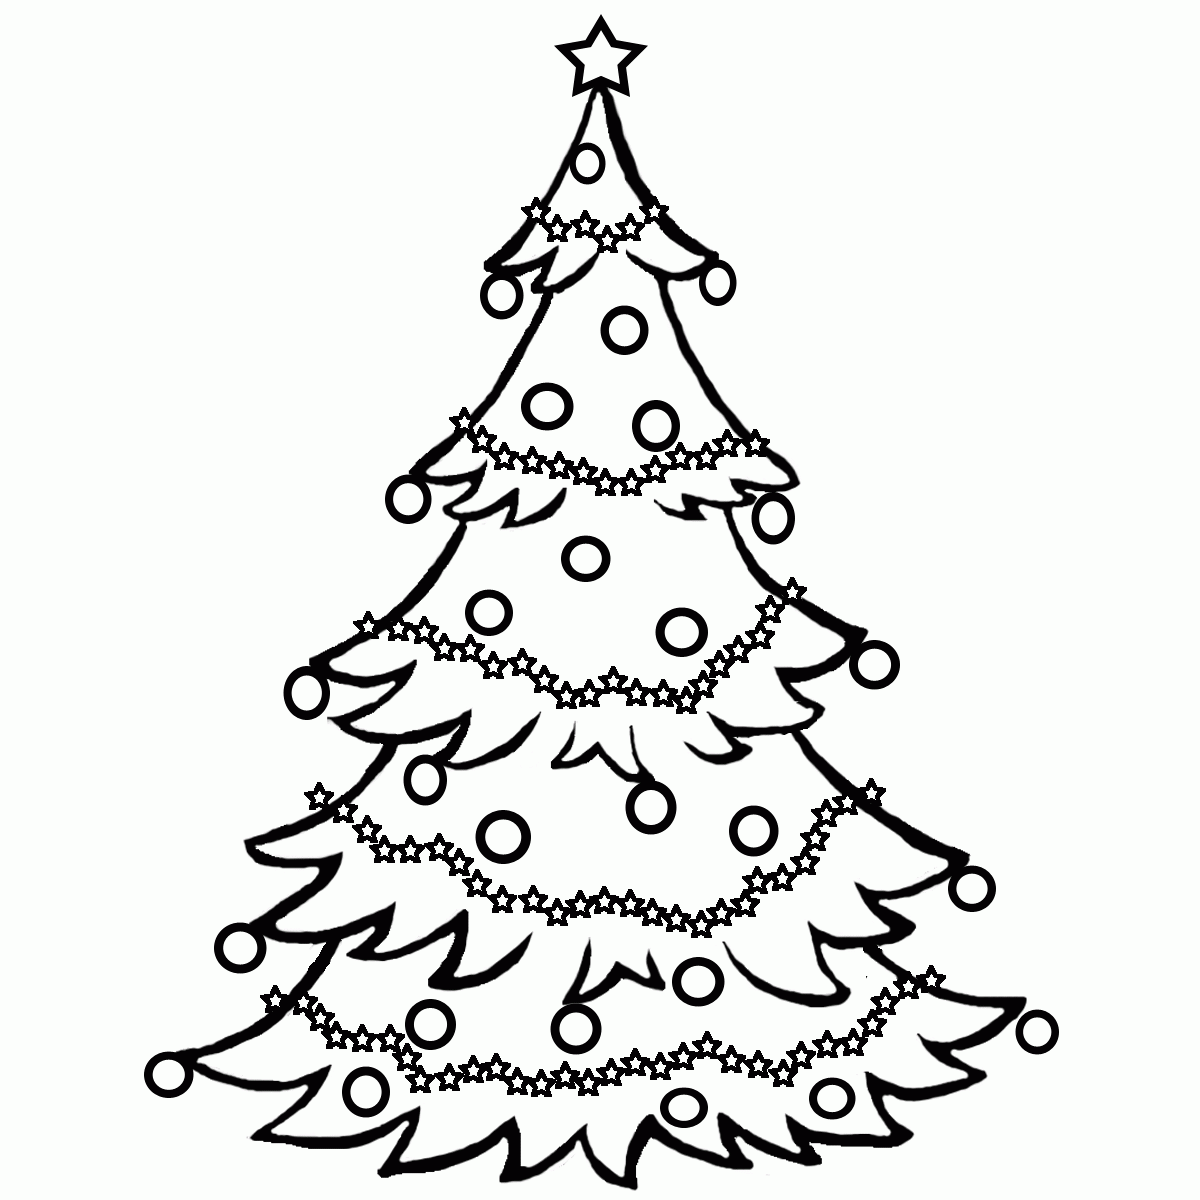 Free Coloring Pages Christmas Snow In A Tree | Christmas Coloring ...